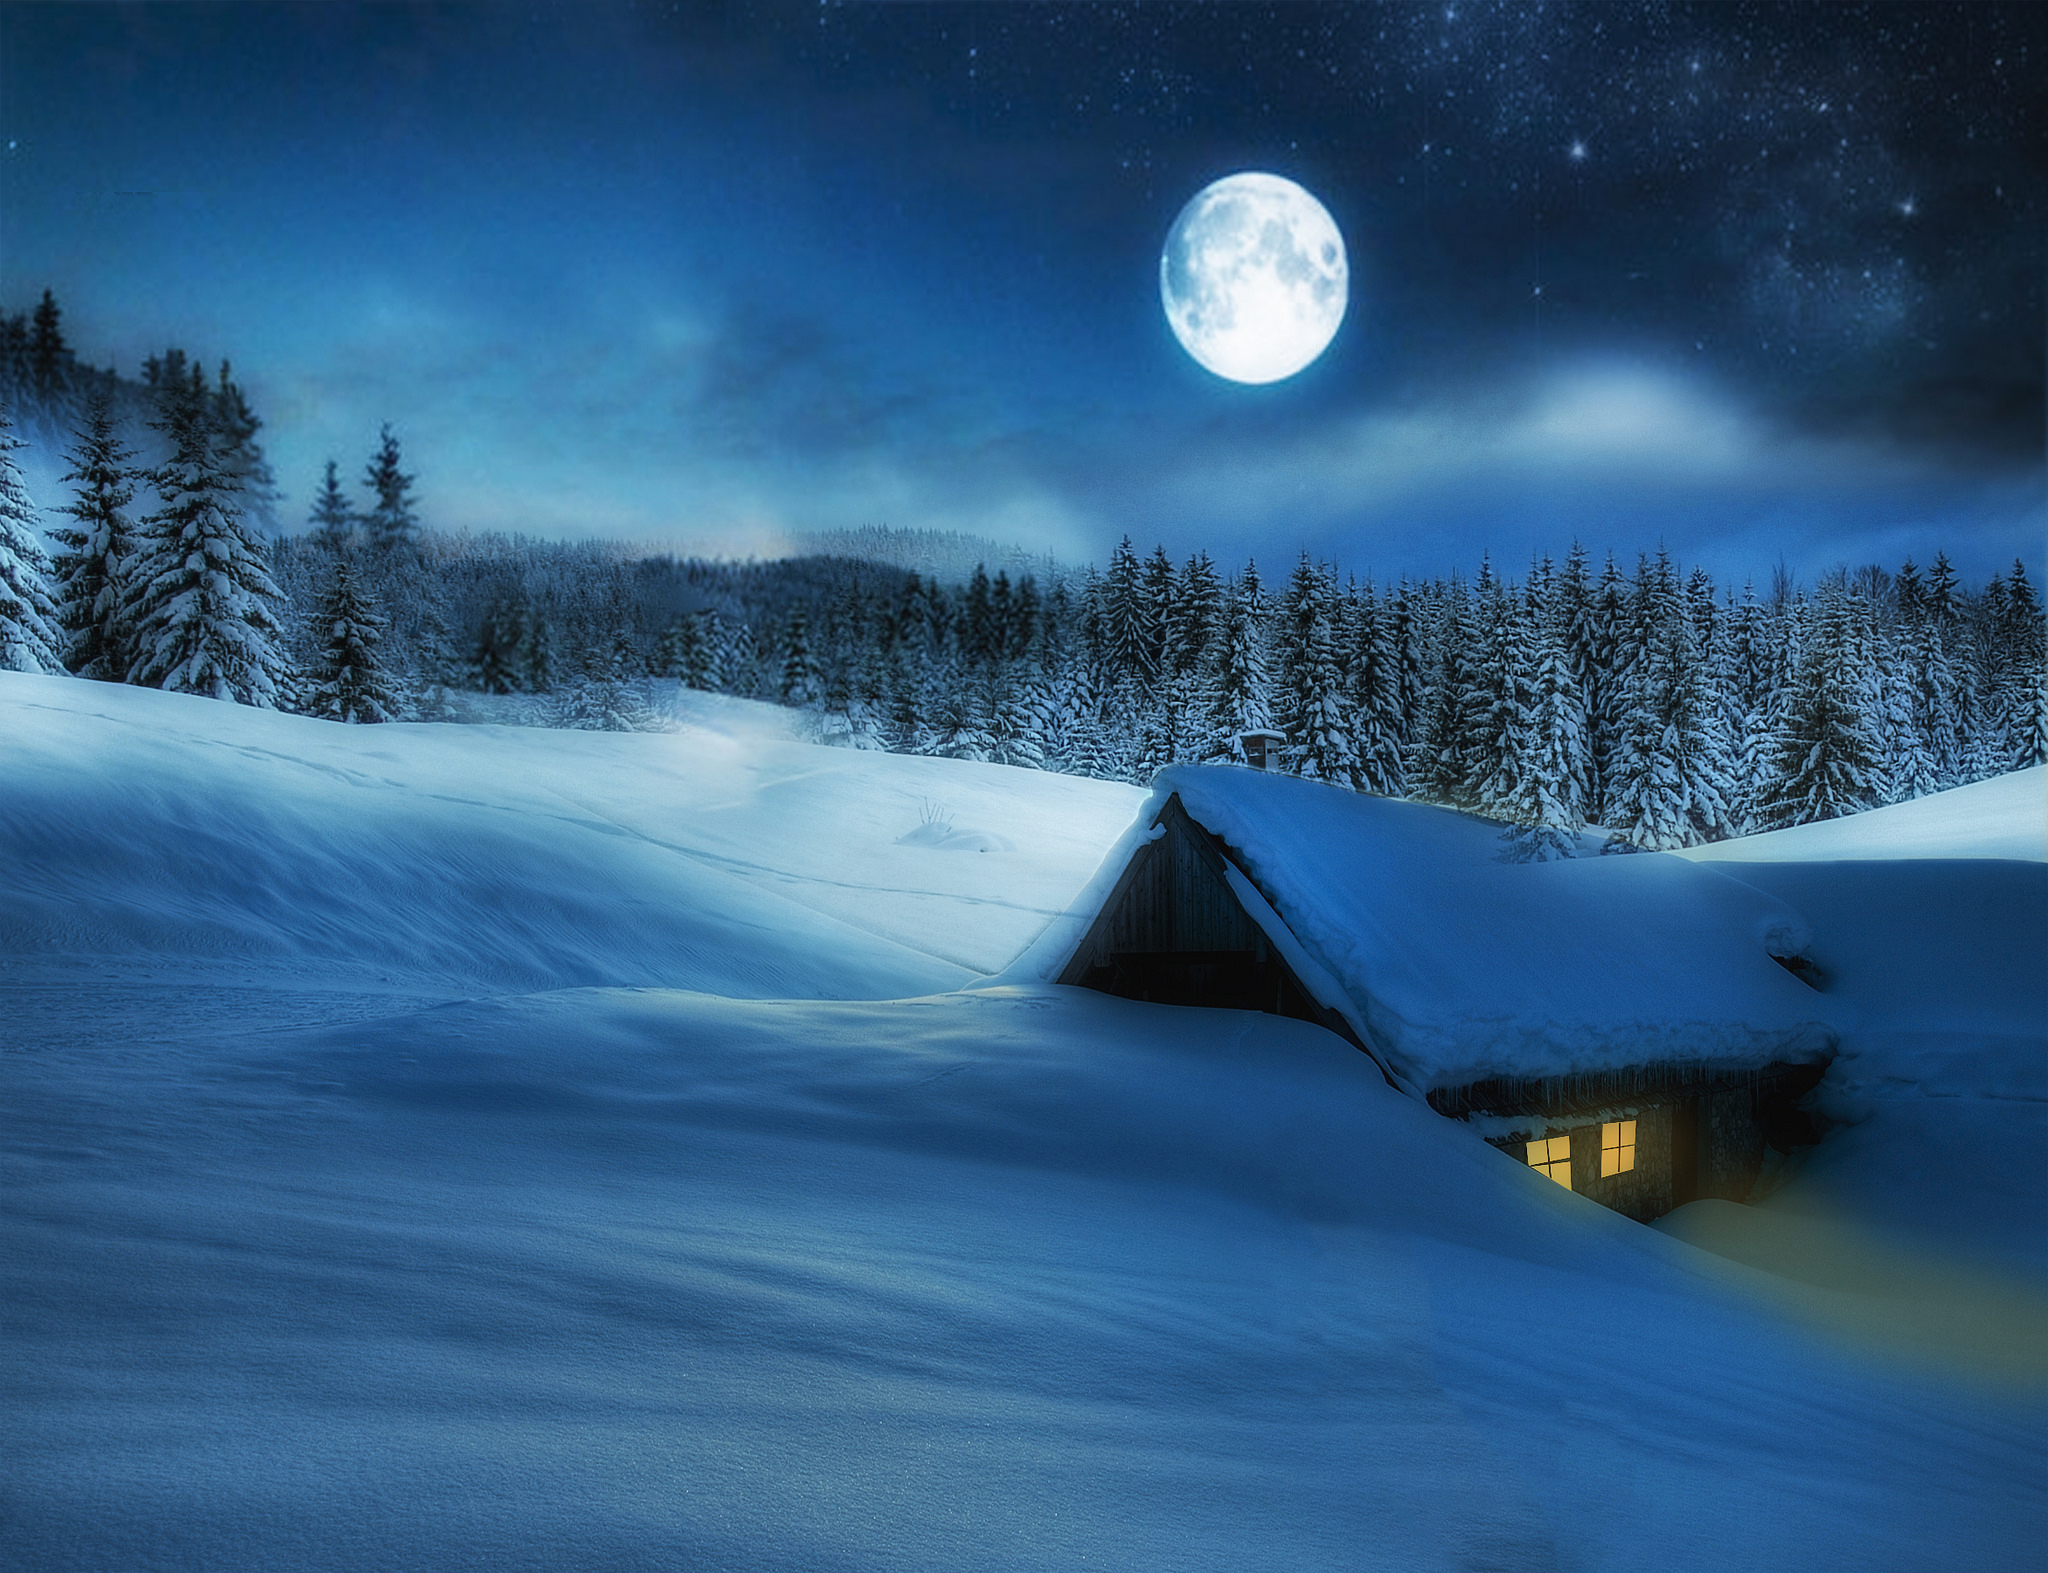 Full Moon over Winter Cabin by Maria Micaela